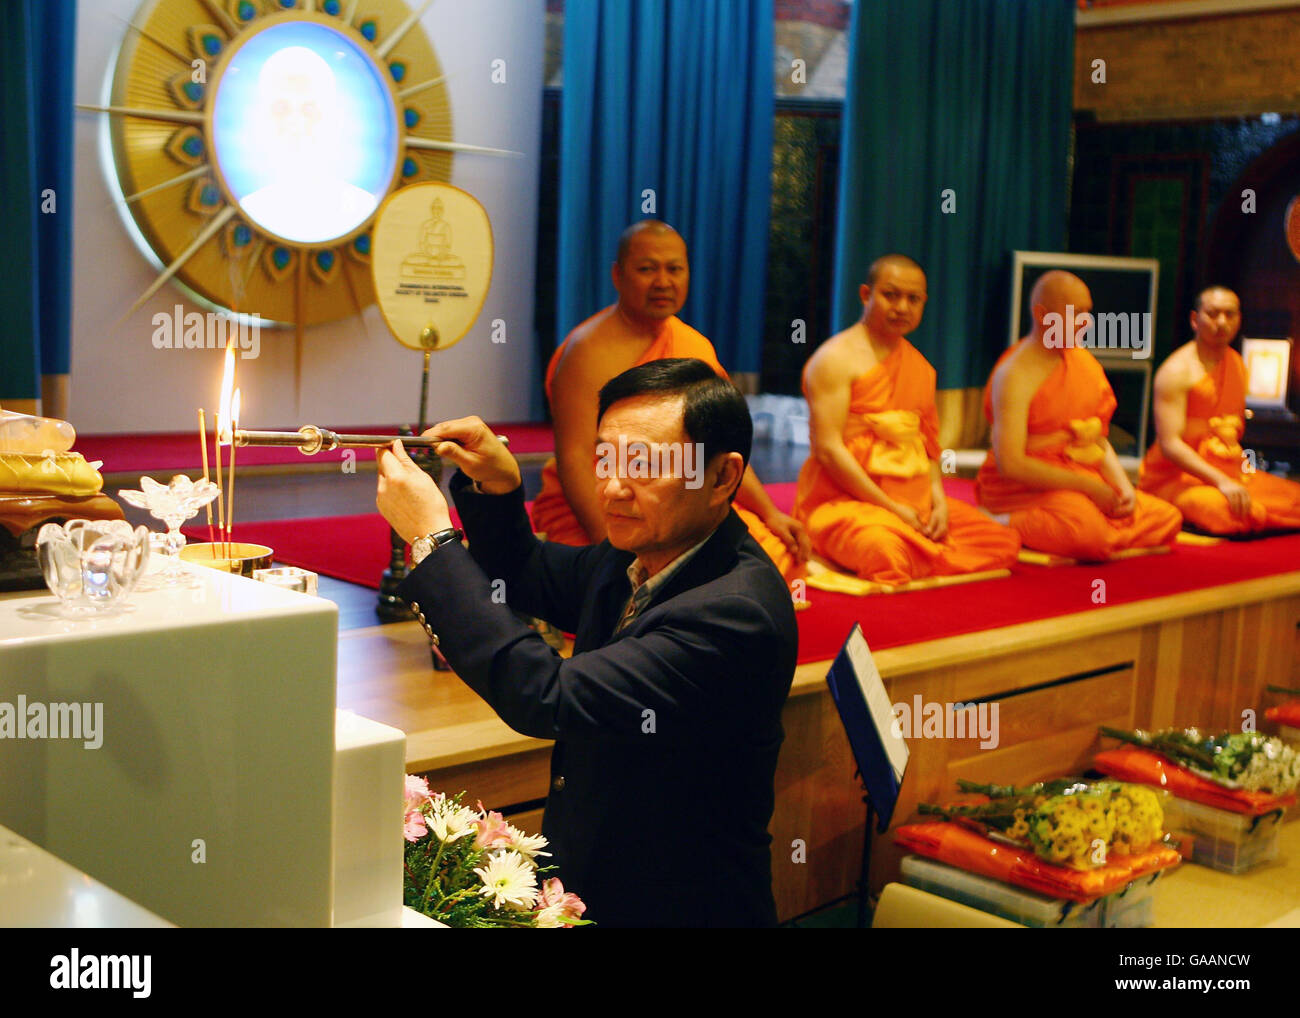 Dr. Thaksin Shinawatra, former Prime Minister of Thailand, marks his respect for Bhudda at the Dhammakaya Centre for Buddist Meditation in Knaphill, Surrey, a year after being ousted from office. Stock Photo